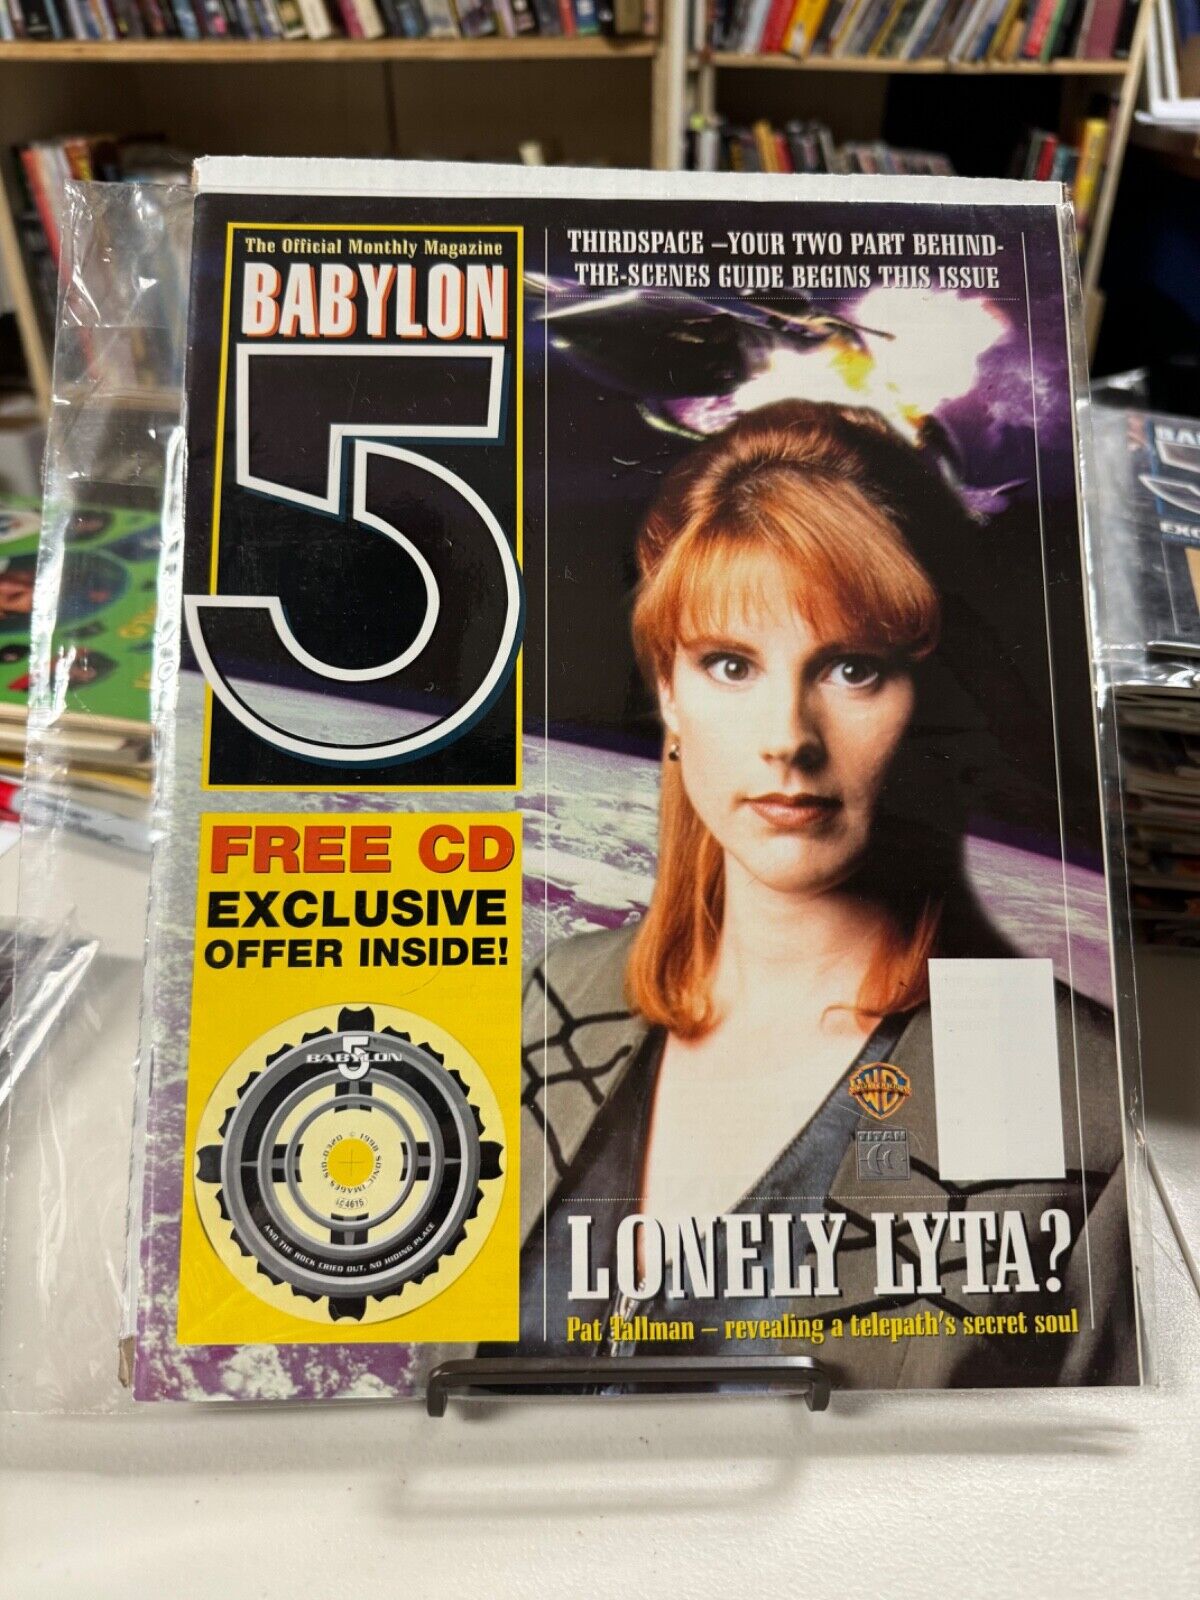 Babylon 5 The Official Monthly Magazine 1998 Vol 2 No 4 Pat Tallman Lonely Lyta?